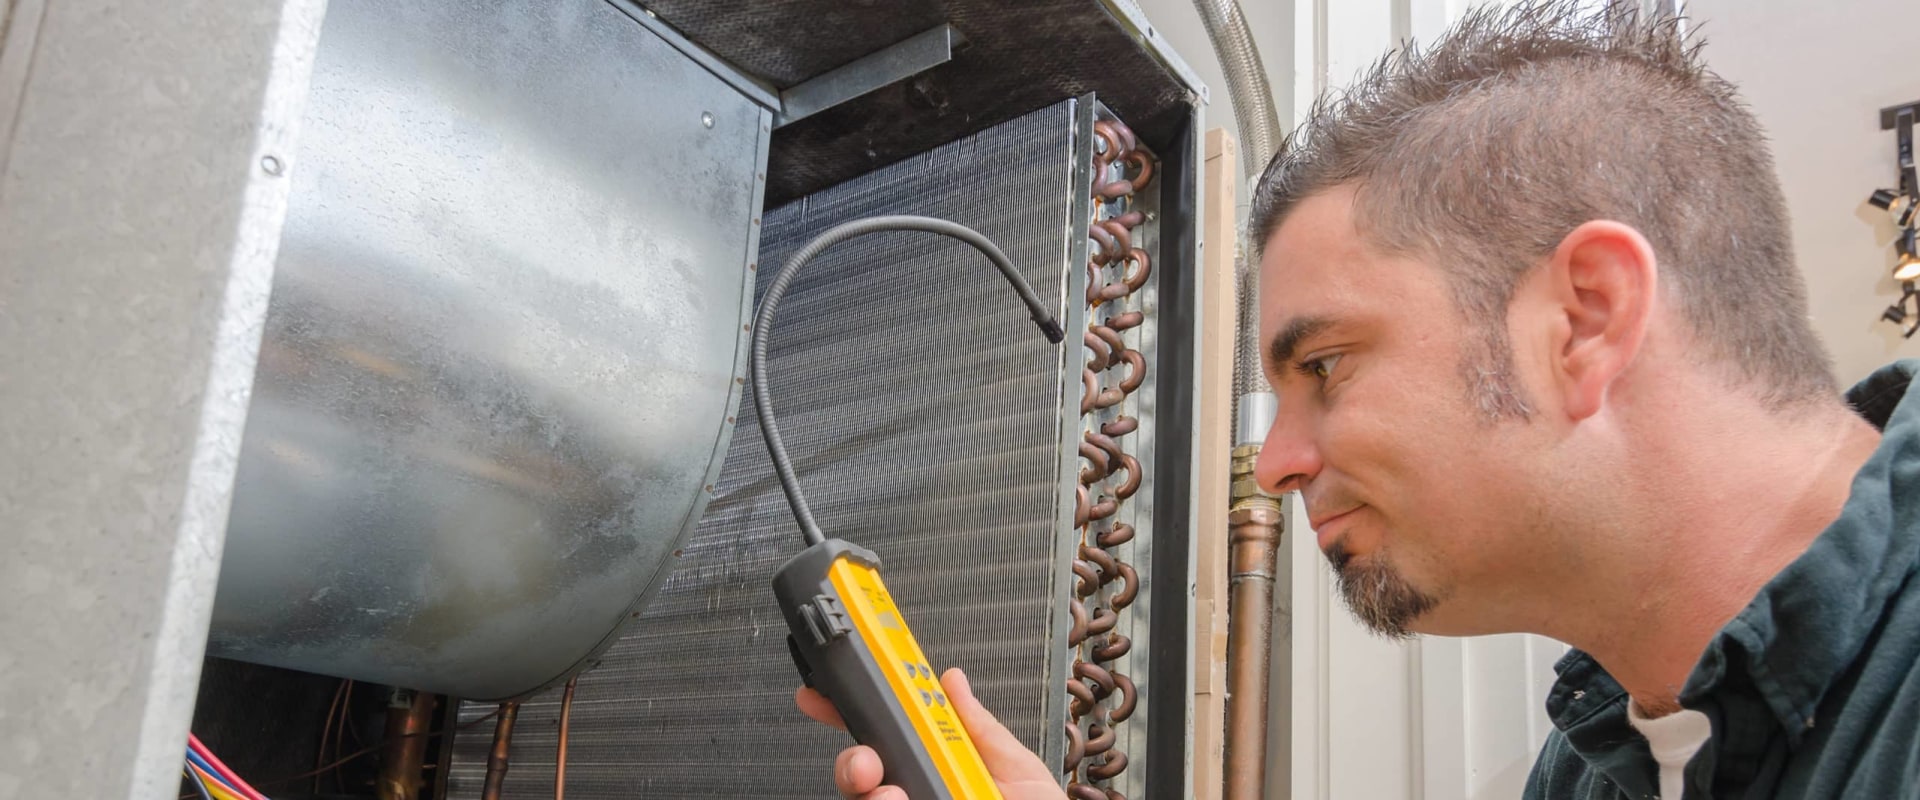 Essential Tools for HVAC Technicians: Invest in Quality for Safety and Efficiency